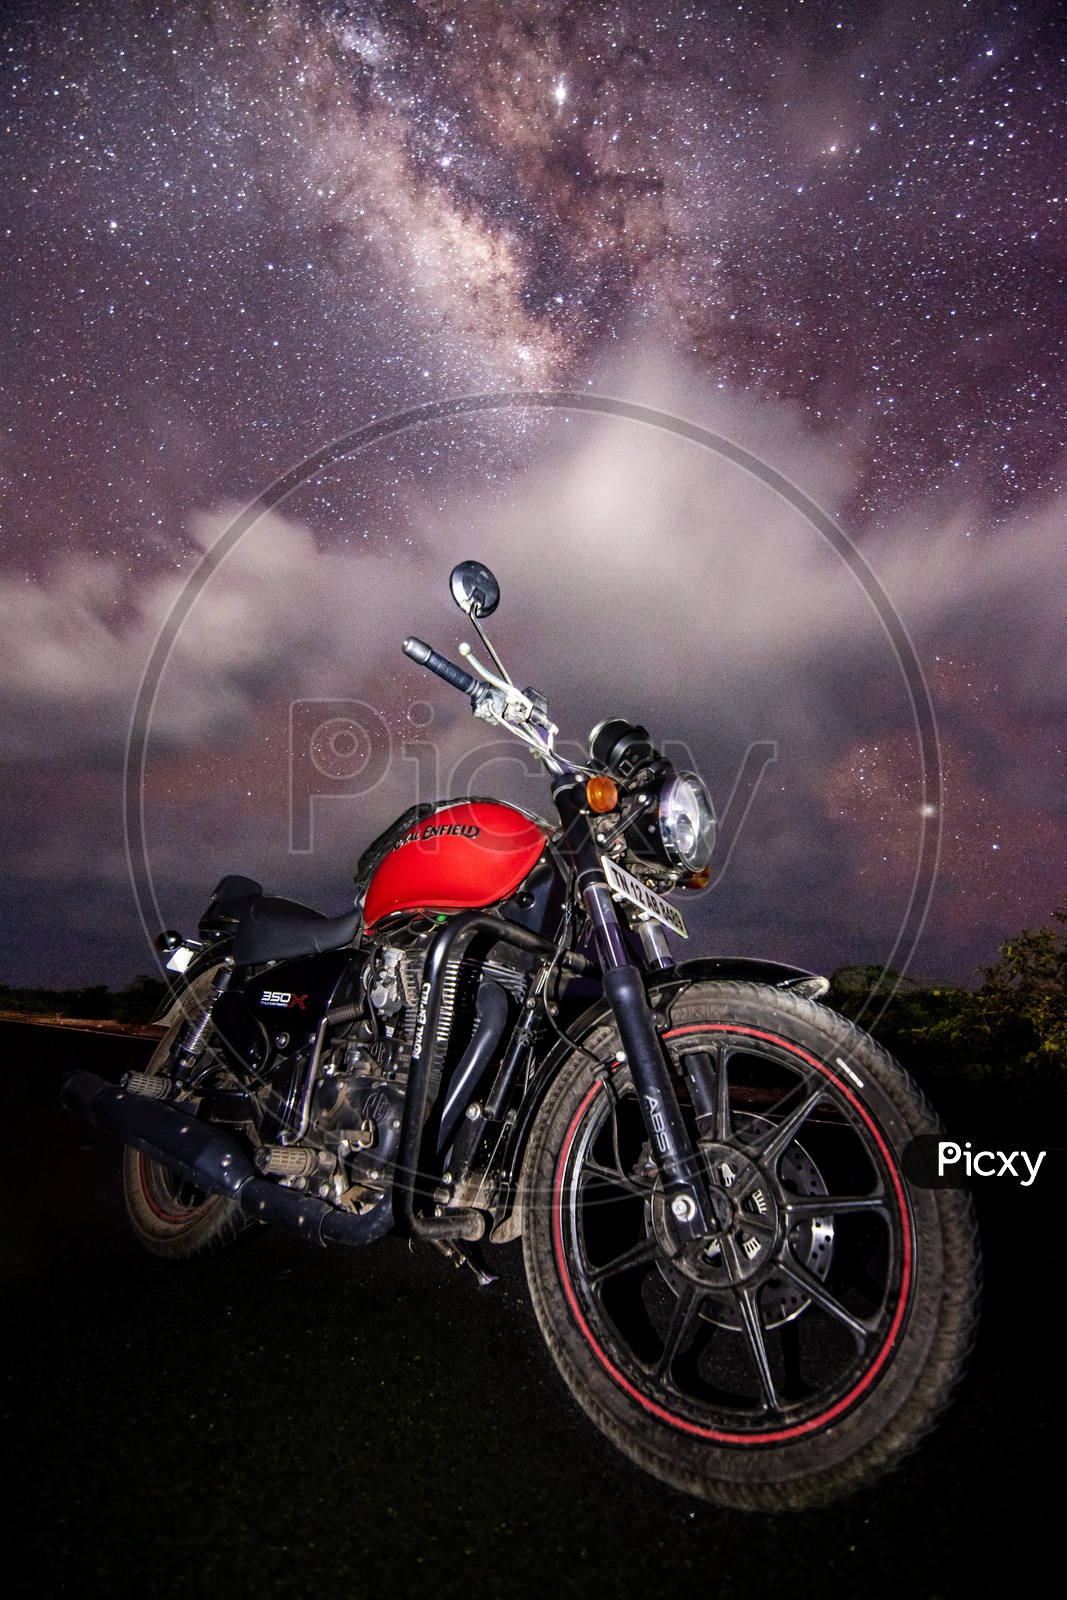 Amazing Milky way And Stargazing  With Royal Enfield Bike In Foreground